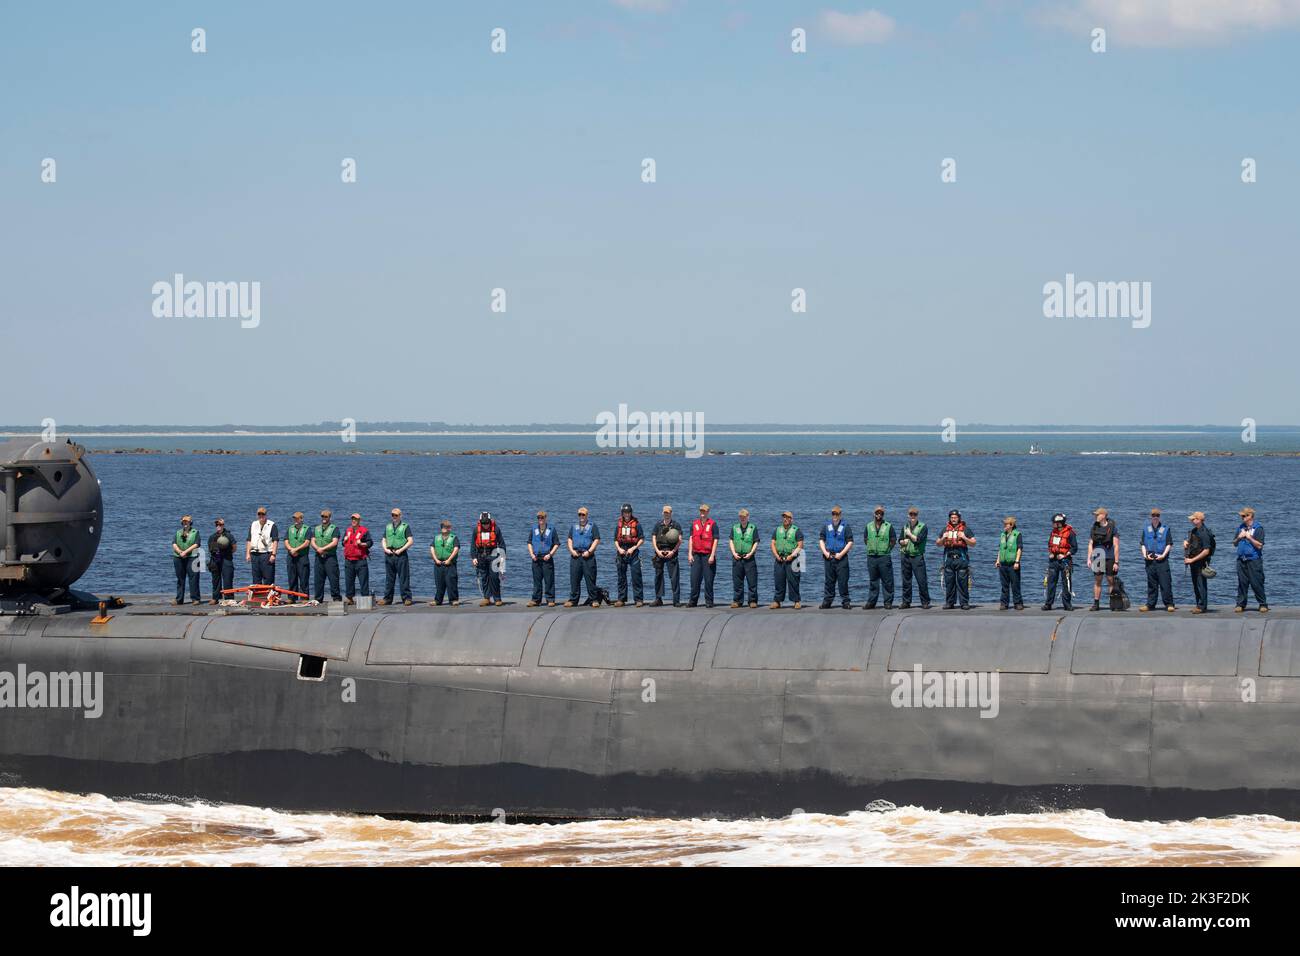 Kings Bay, United States. 22 September, 2022. U.S. Navy sailors man the rails on the hull of the nuclear-power Ohio-class guided-missile submarine USS Georgia as it returns to its homeport at Naval Submarine Base Kings Bay September 22, 2022 in St Marys, Georgia. Credit: MCS Ashley Berumen/U.S. Navy/Alamy Live News Stock Photo